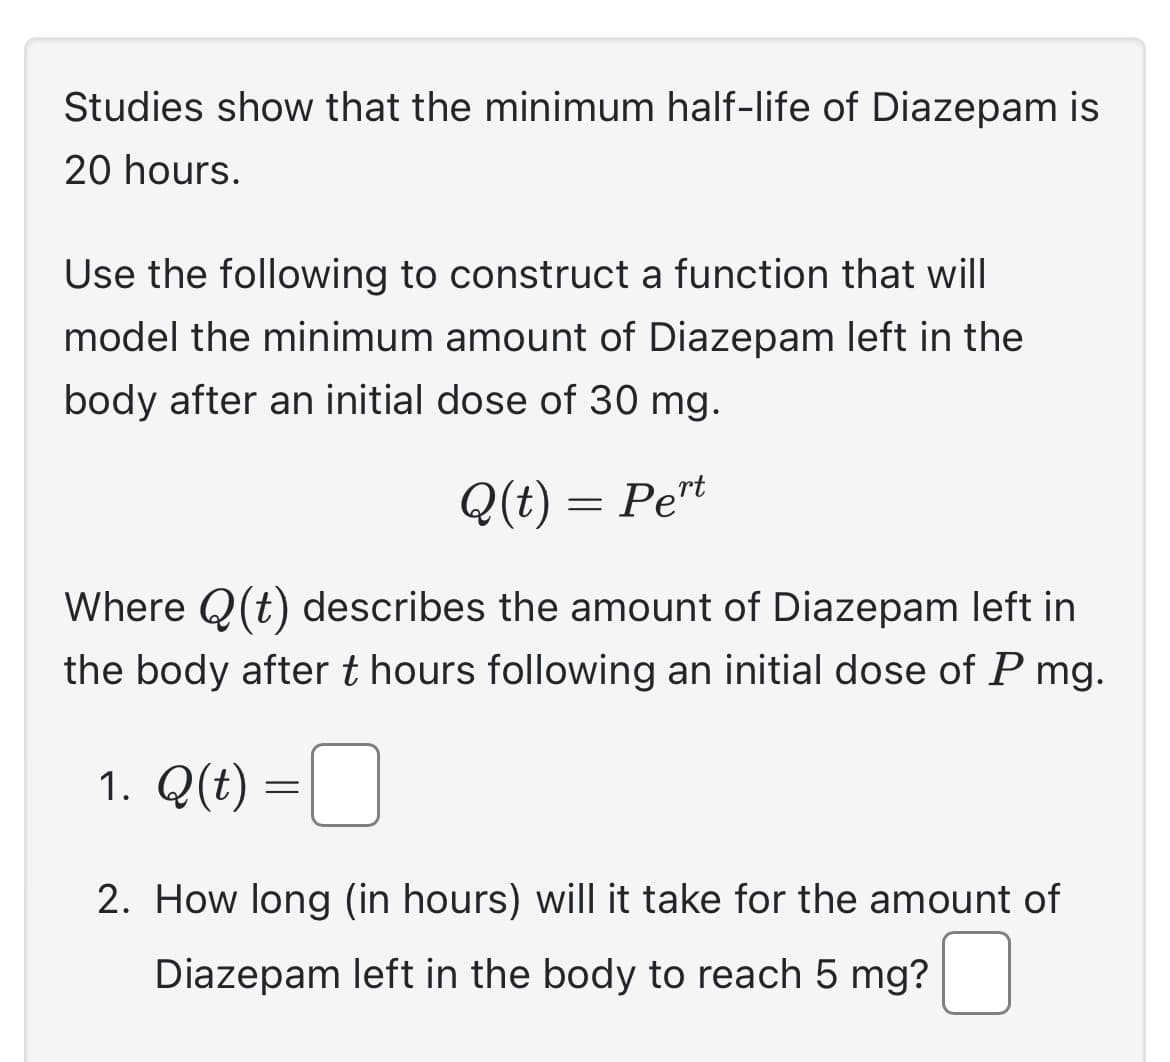 Studies show that the minimum half-life of Diazepam is
20 hours.
Use the following to construct a function that will
model the minimum amount of Diazepam left in the
body after an initial dose of 30 mg.
Q(t) = Pert
Where Q(t) describes the amount of Diazepam left in
the body after t hours following an initial dose of P mg.
1. Q(t) =
2. How long (in hours) will it take for the amount of
Diazepam left in the body to reach 5 mg?